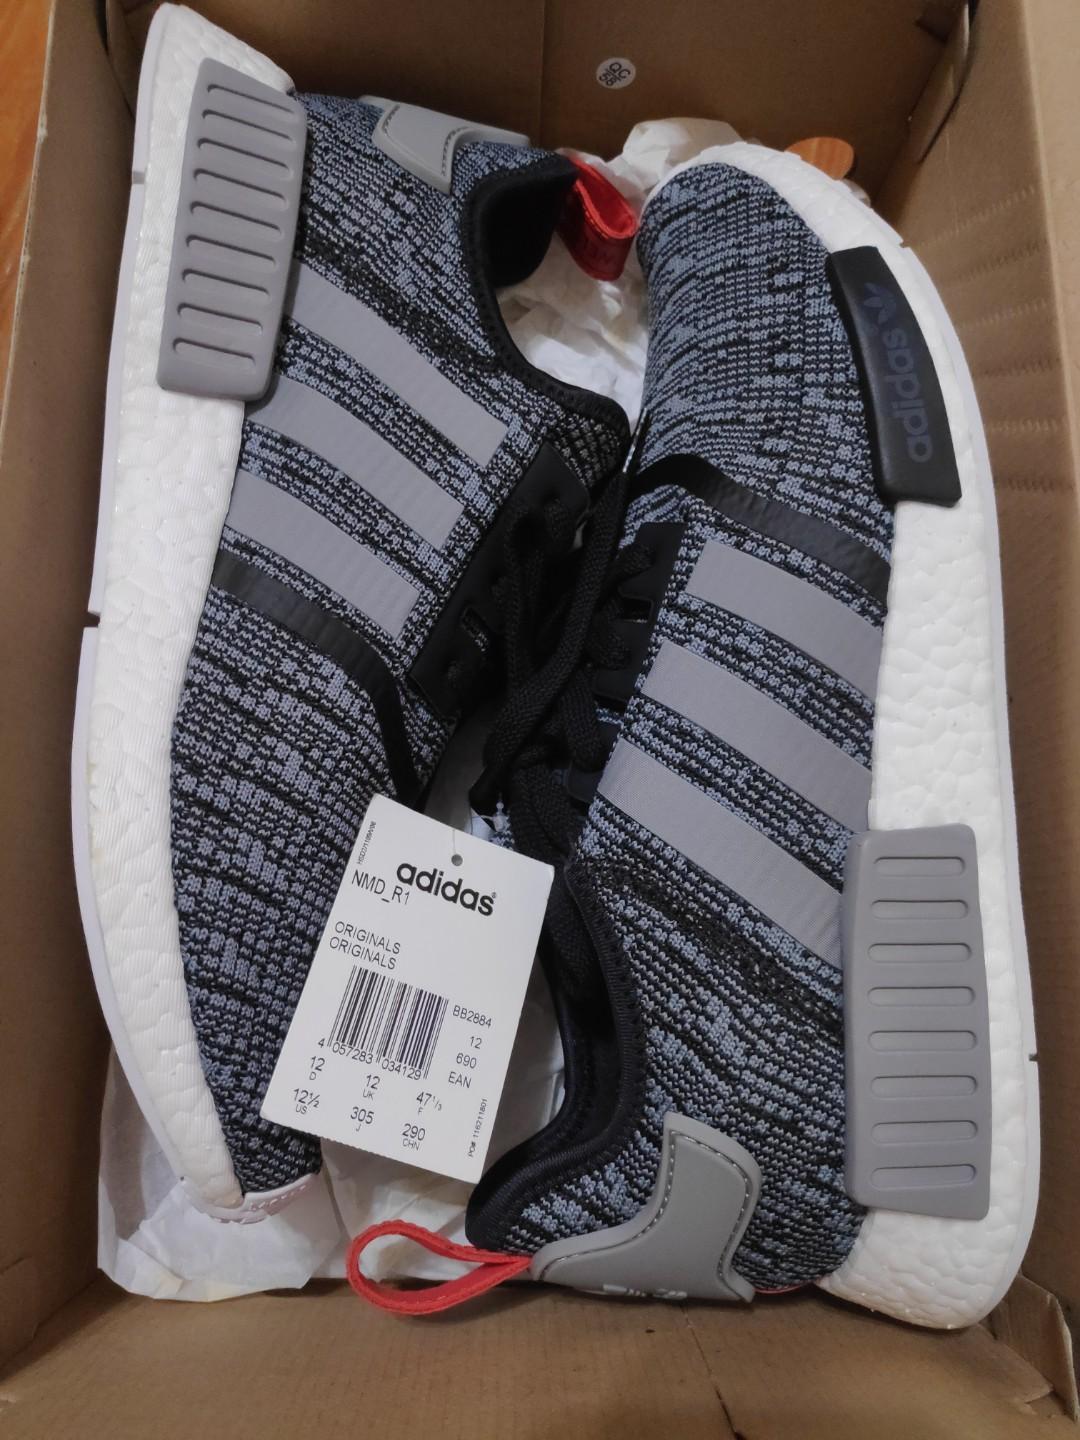 Adidas NMD R1 size 12.5, Men's Fashion, Footwear, Sneakers on Carousell